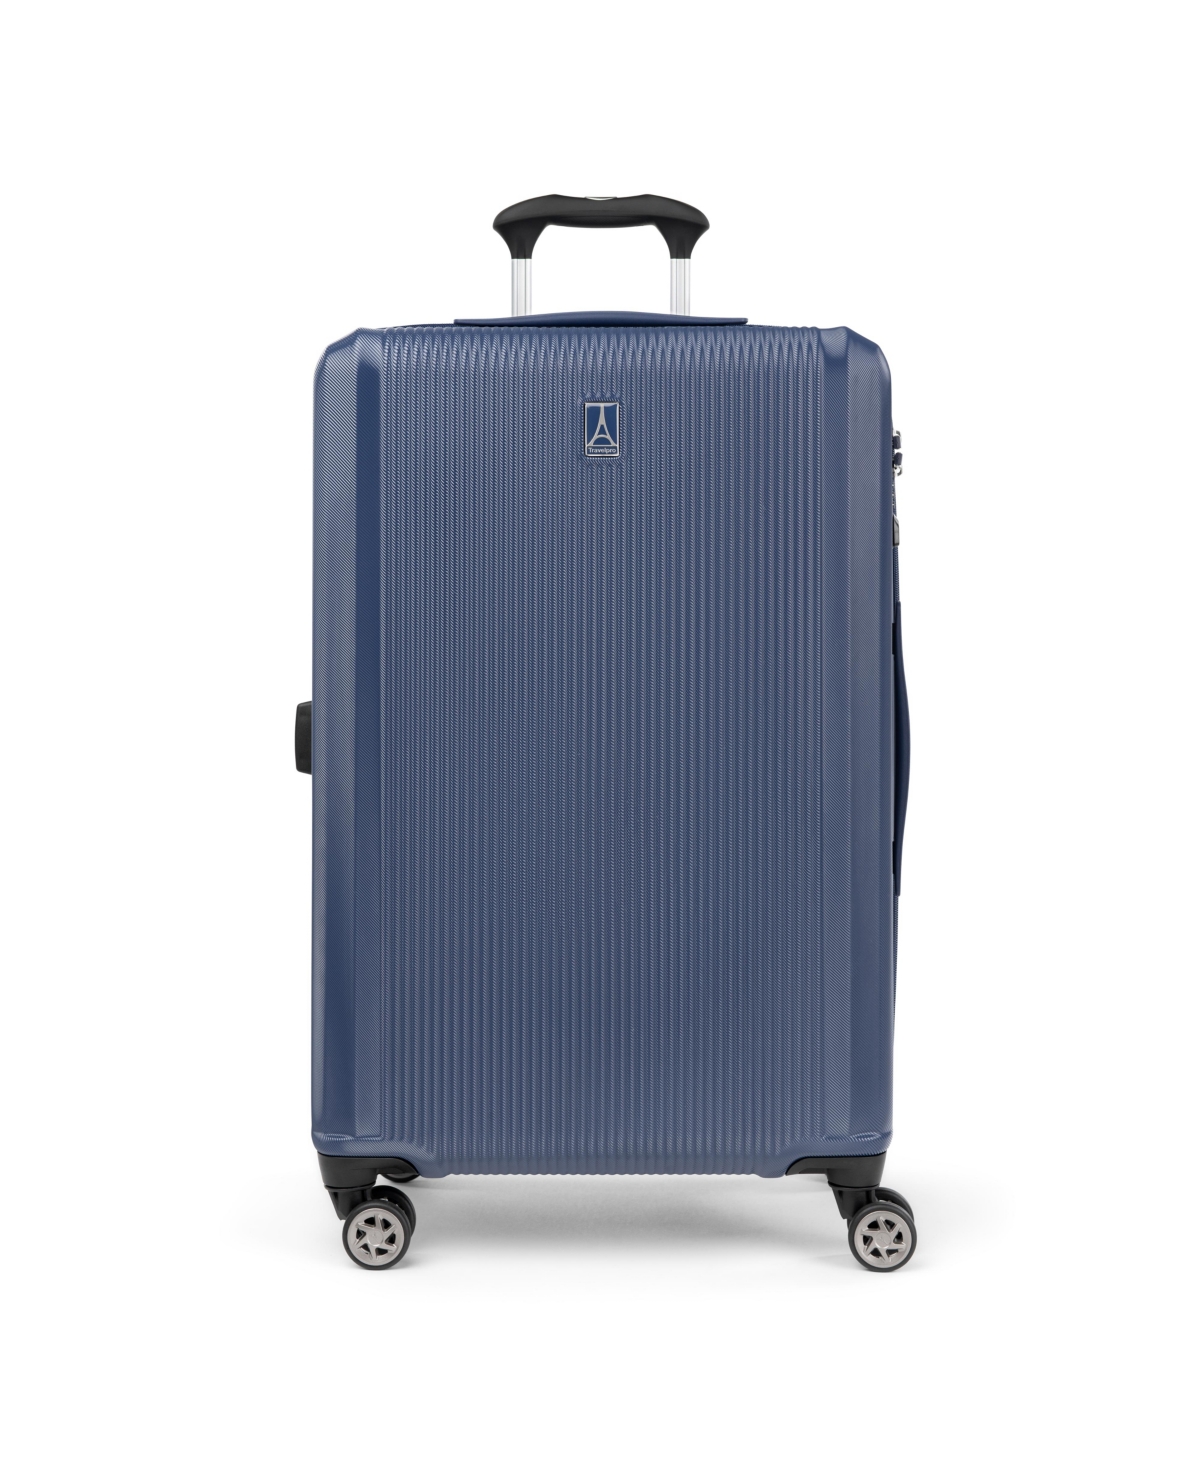 WalkAbout 6 Medium Check-In Expandable Hardside Spinner, Created for Macy's - Mediterranea